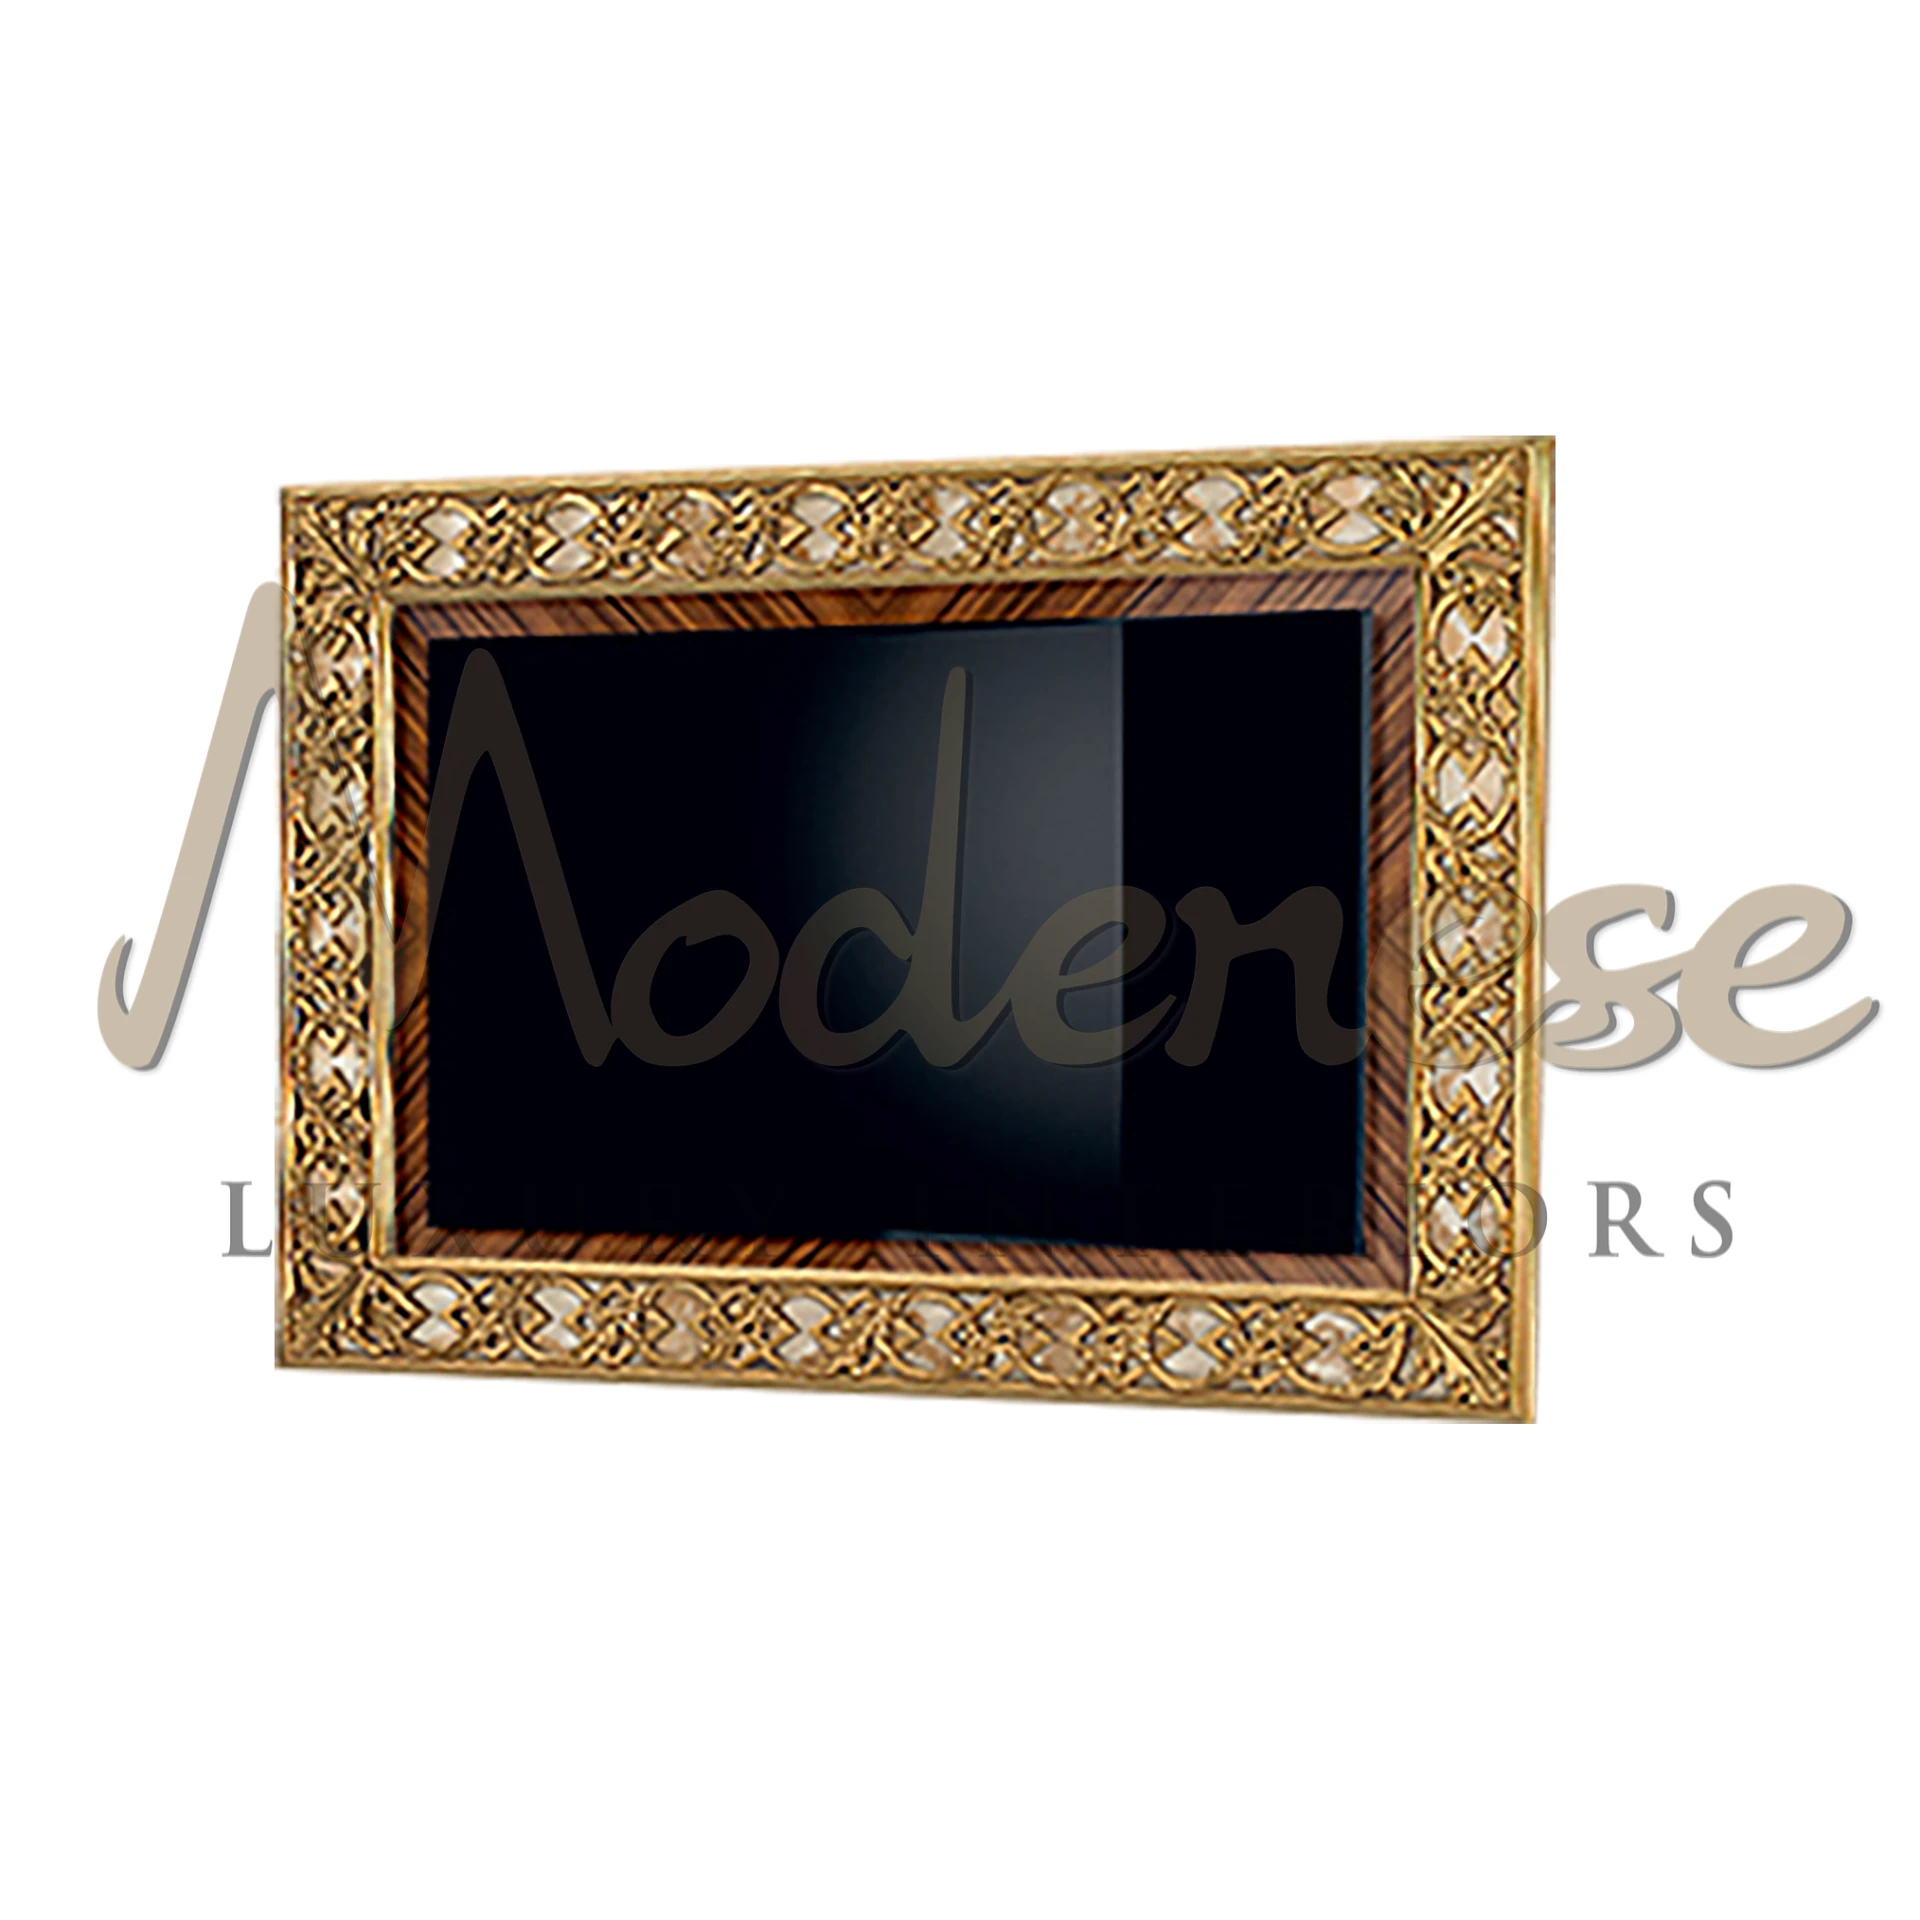 Exquisite Rectangular TV Frame with gold leaf finishing, showcasing Modenese craftsmanship for a luxurious living room.